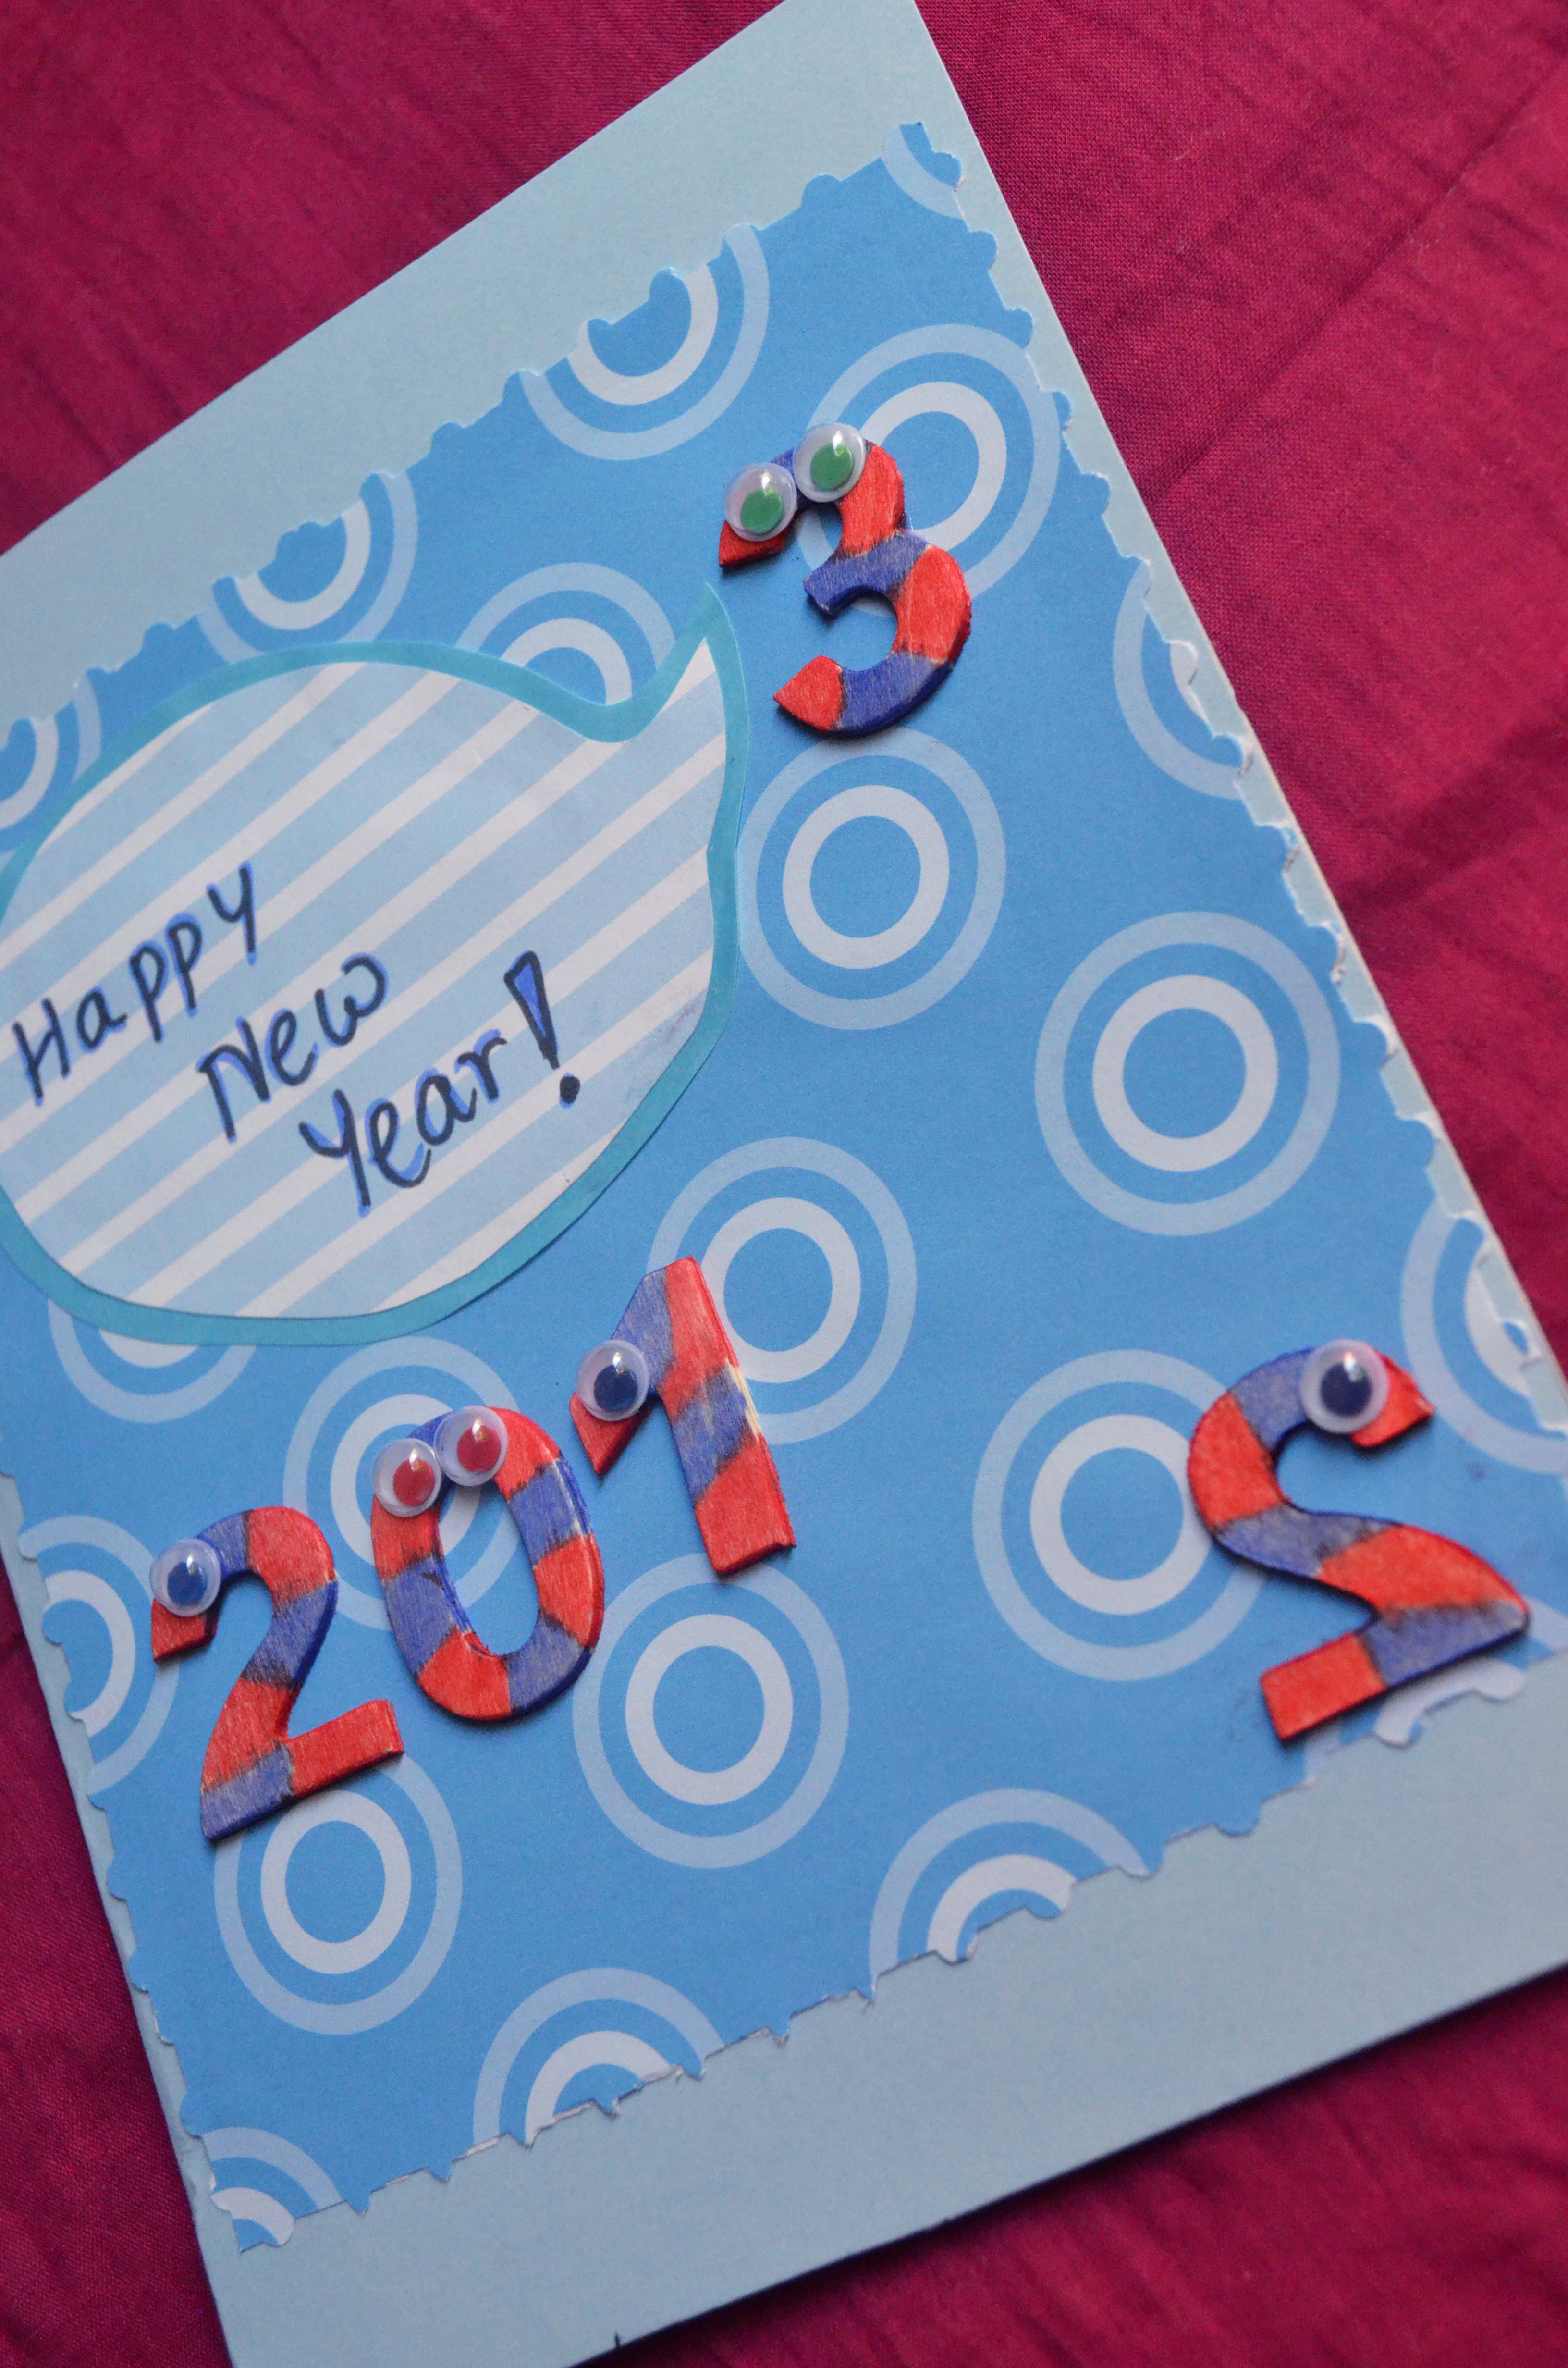 New Year Greetings Cards 2013 For Husband